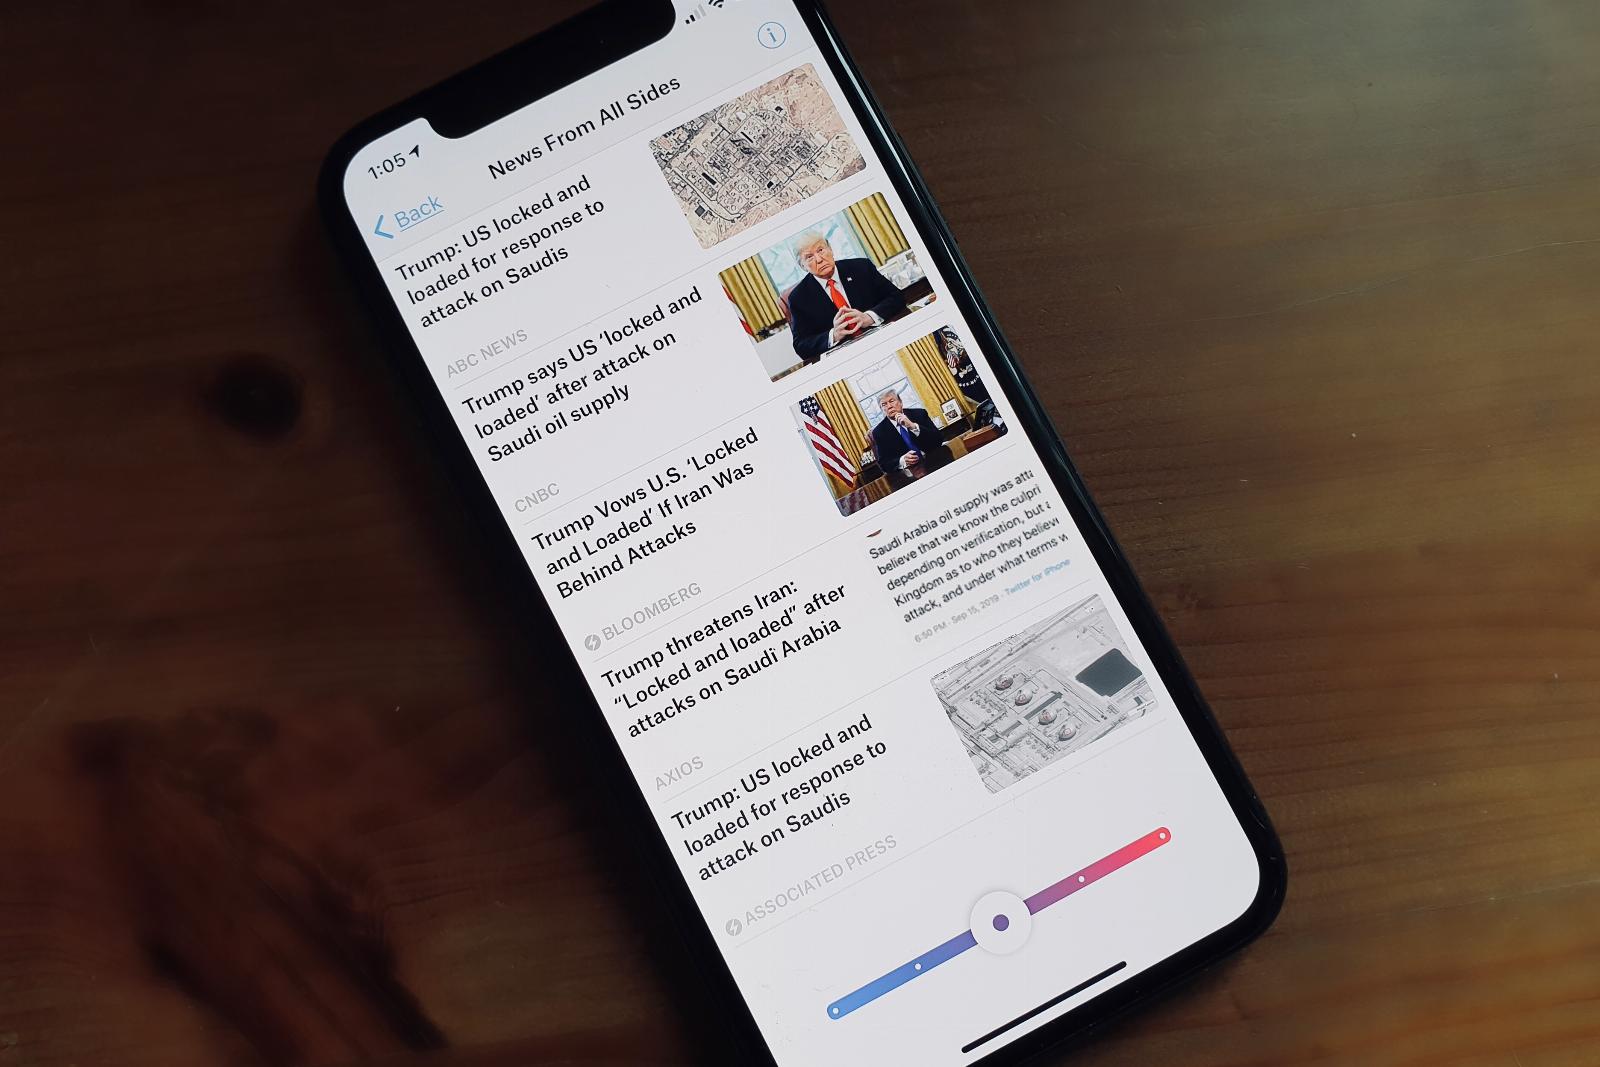 News aggregator app SmartNews’ latest feature aims to tackle doomscrolling